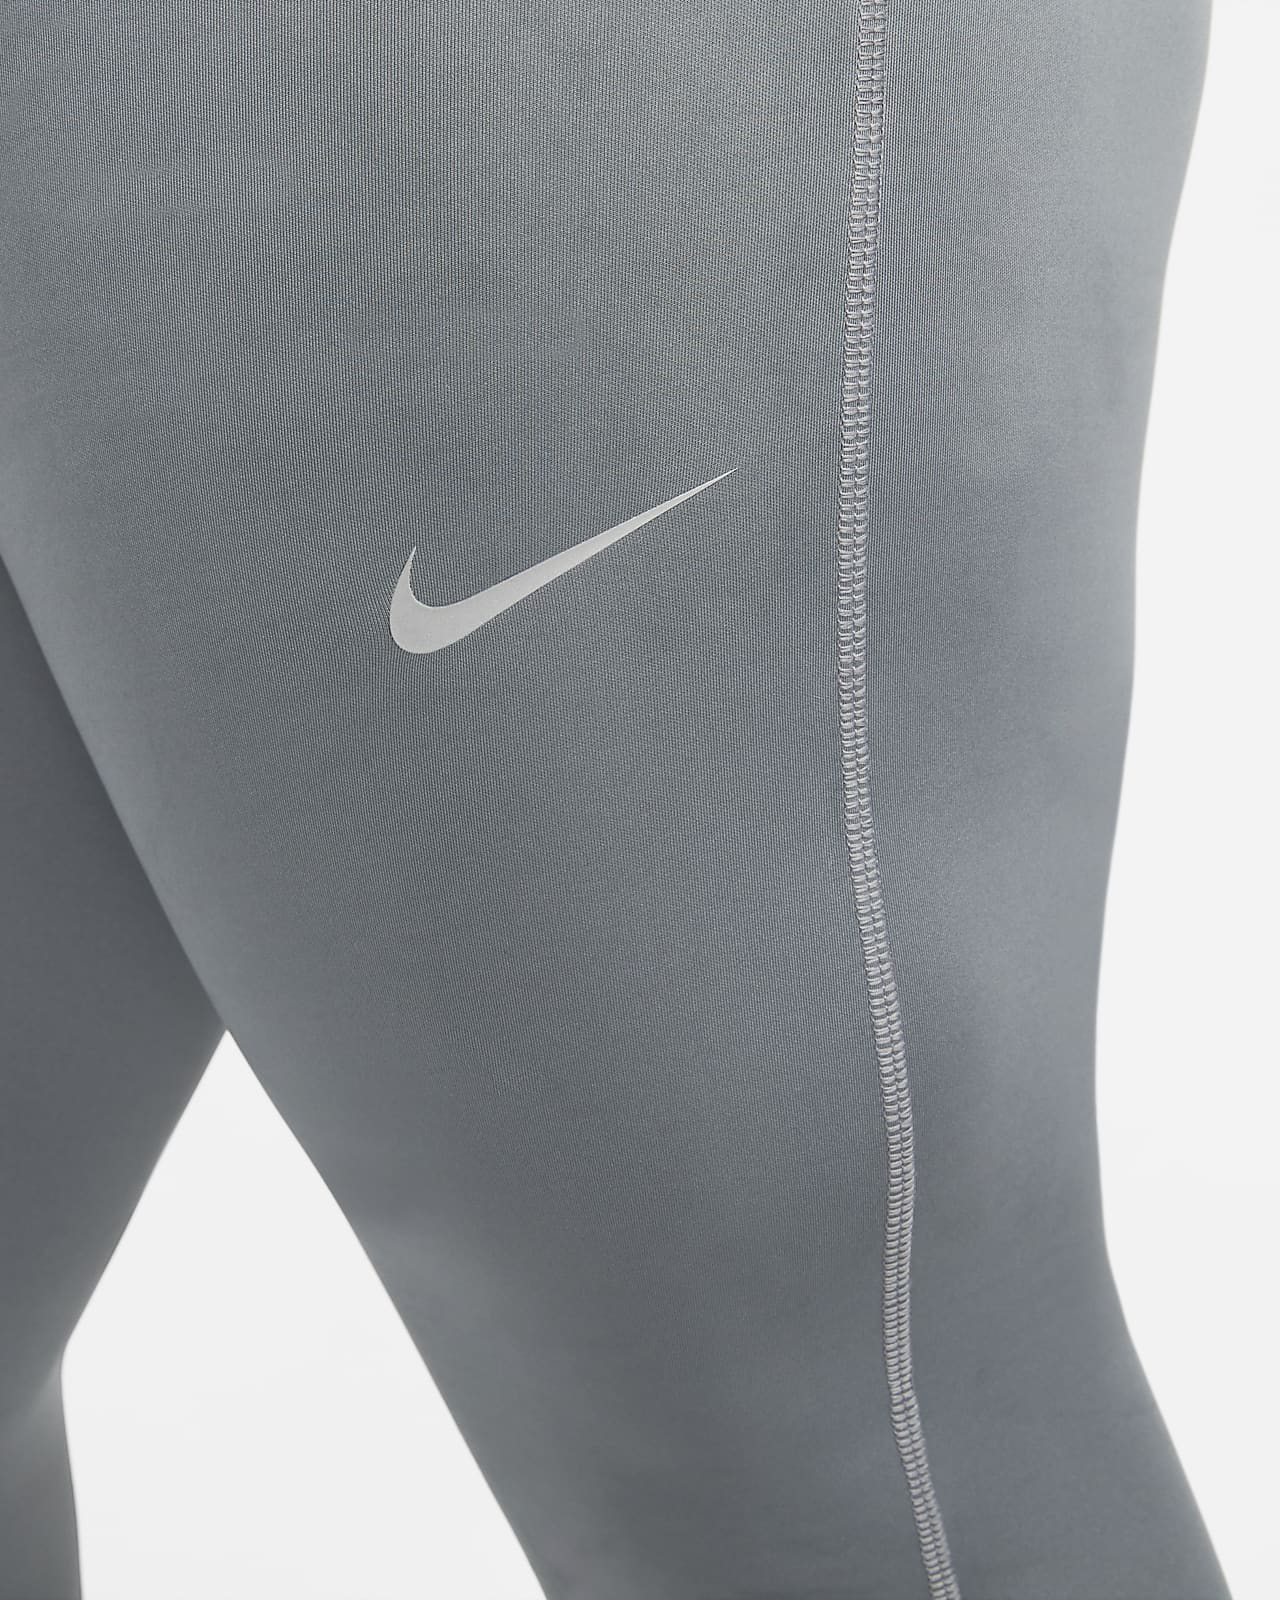 Nike $70 Repel Challenger Men's Running Tights Pant DD6700-010 Size M  195242224984